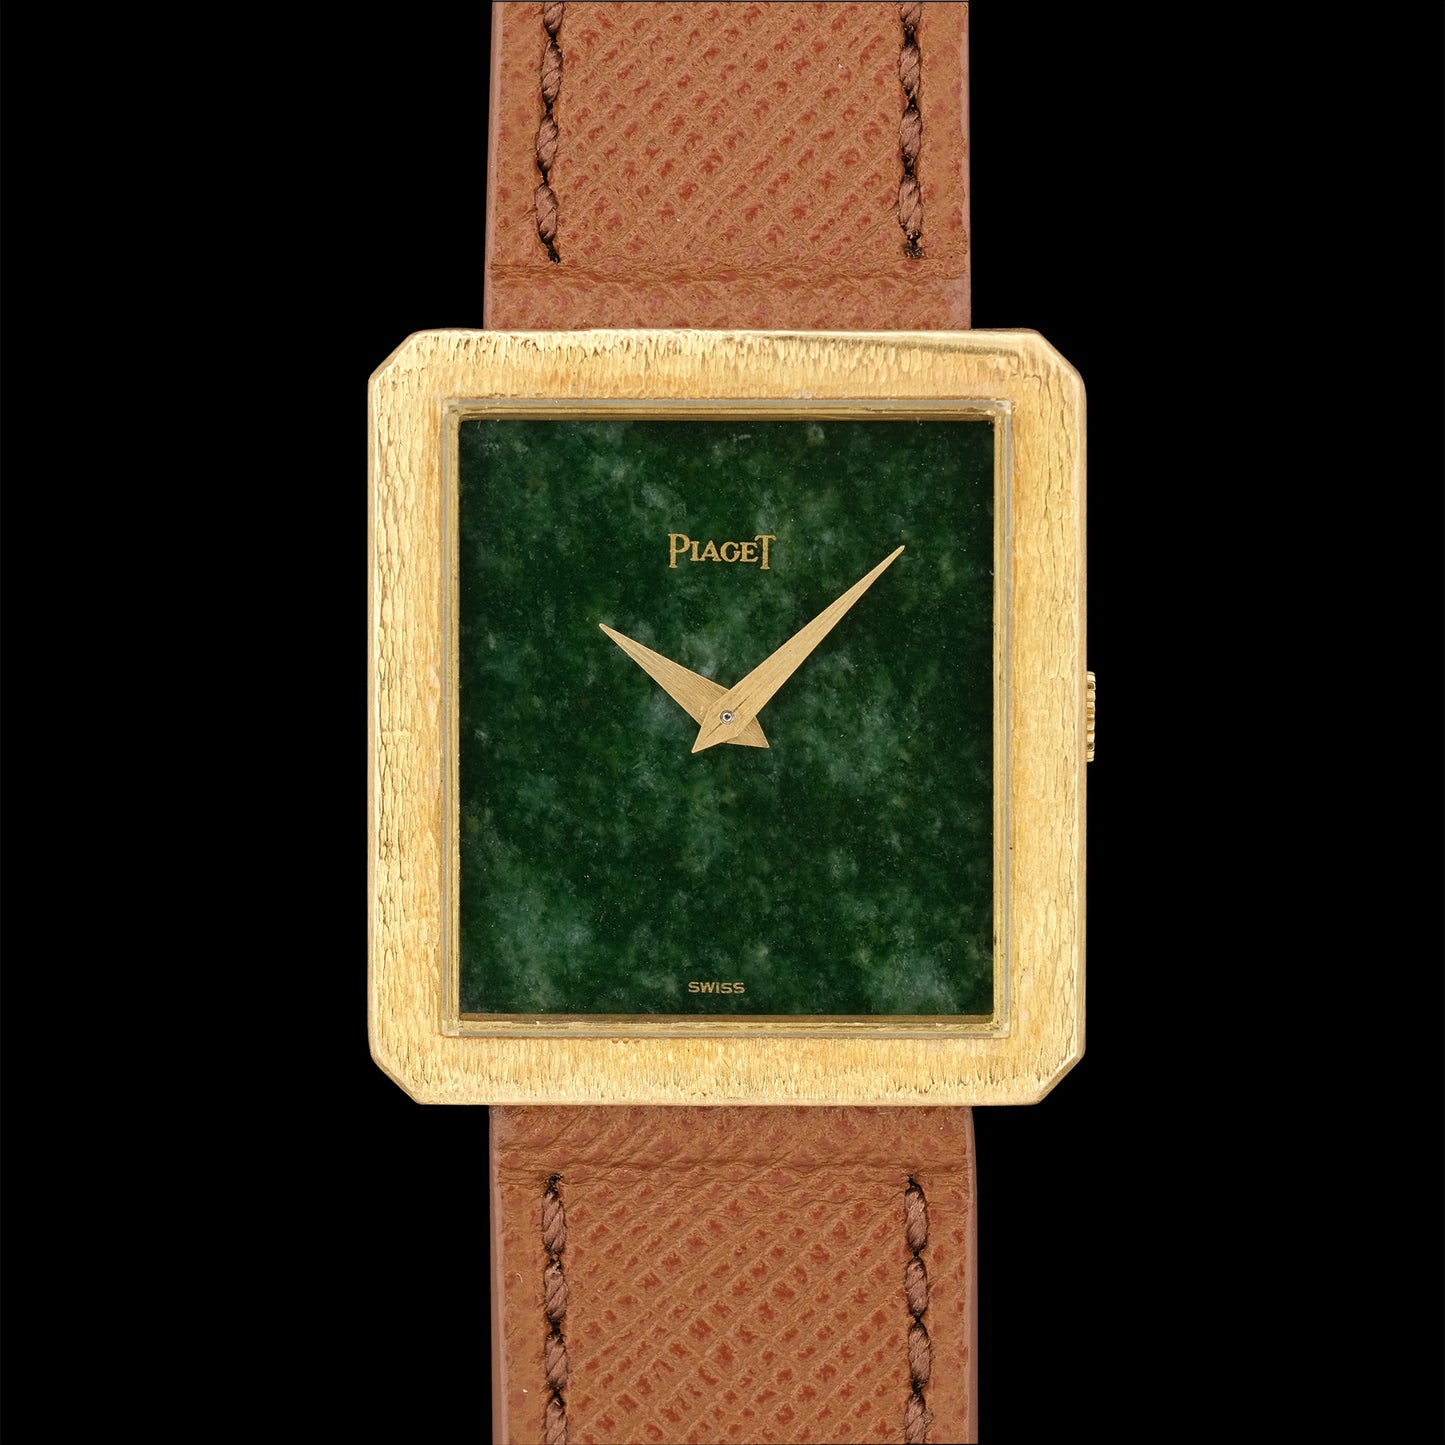 Piaget Protocole ref.9154 Jade Dial from 1970